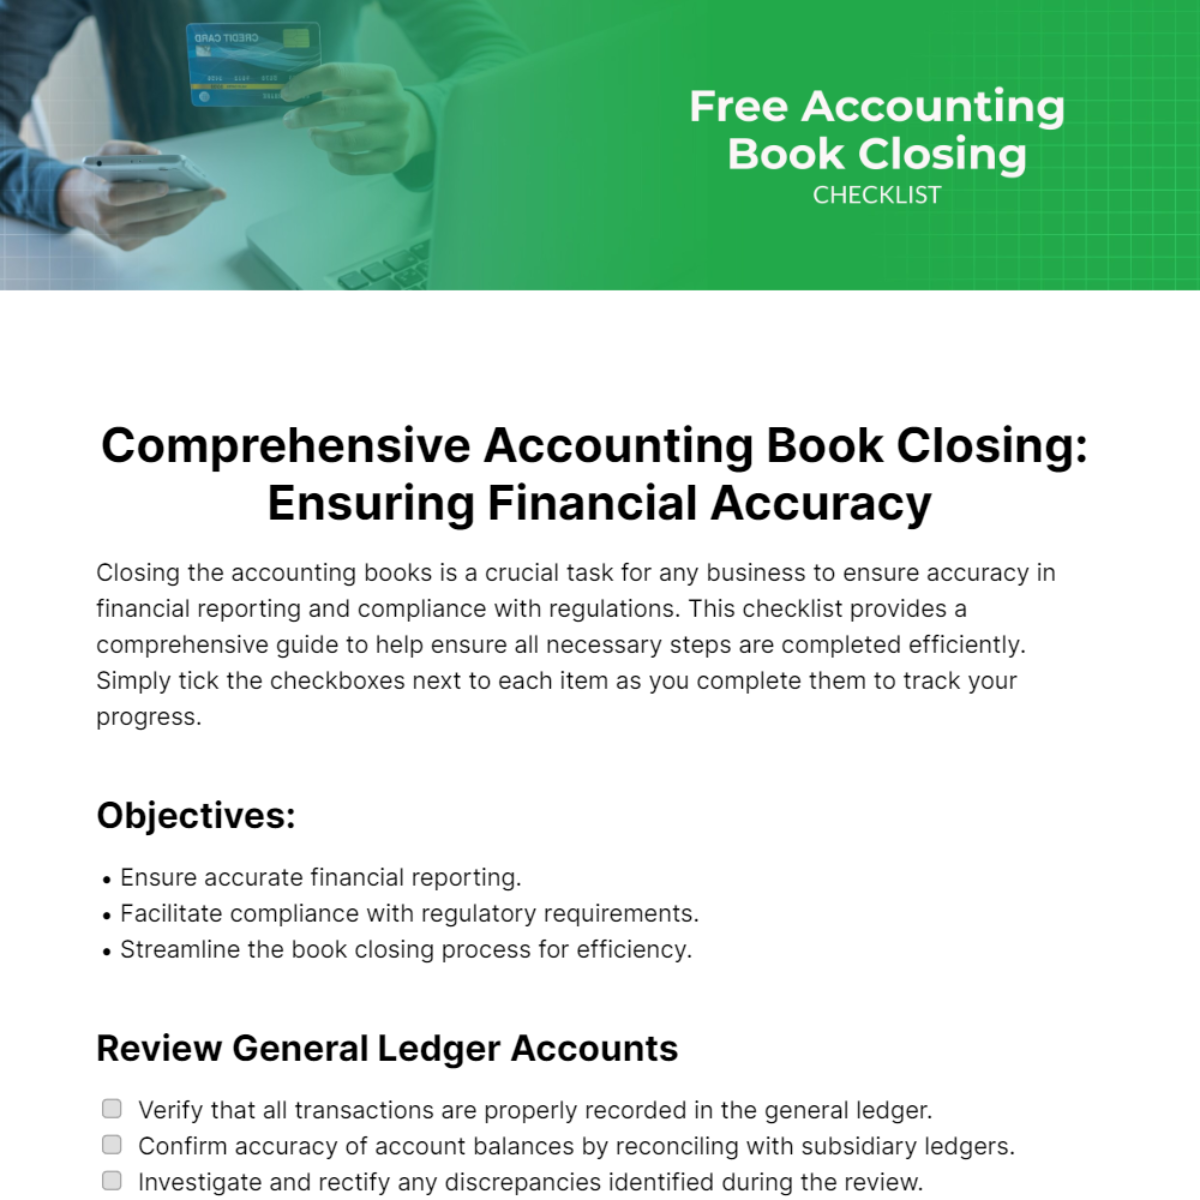 Free Accounting Book Closing Checklist Template